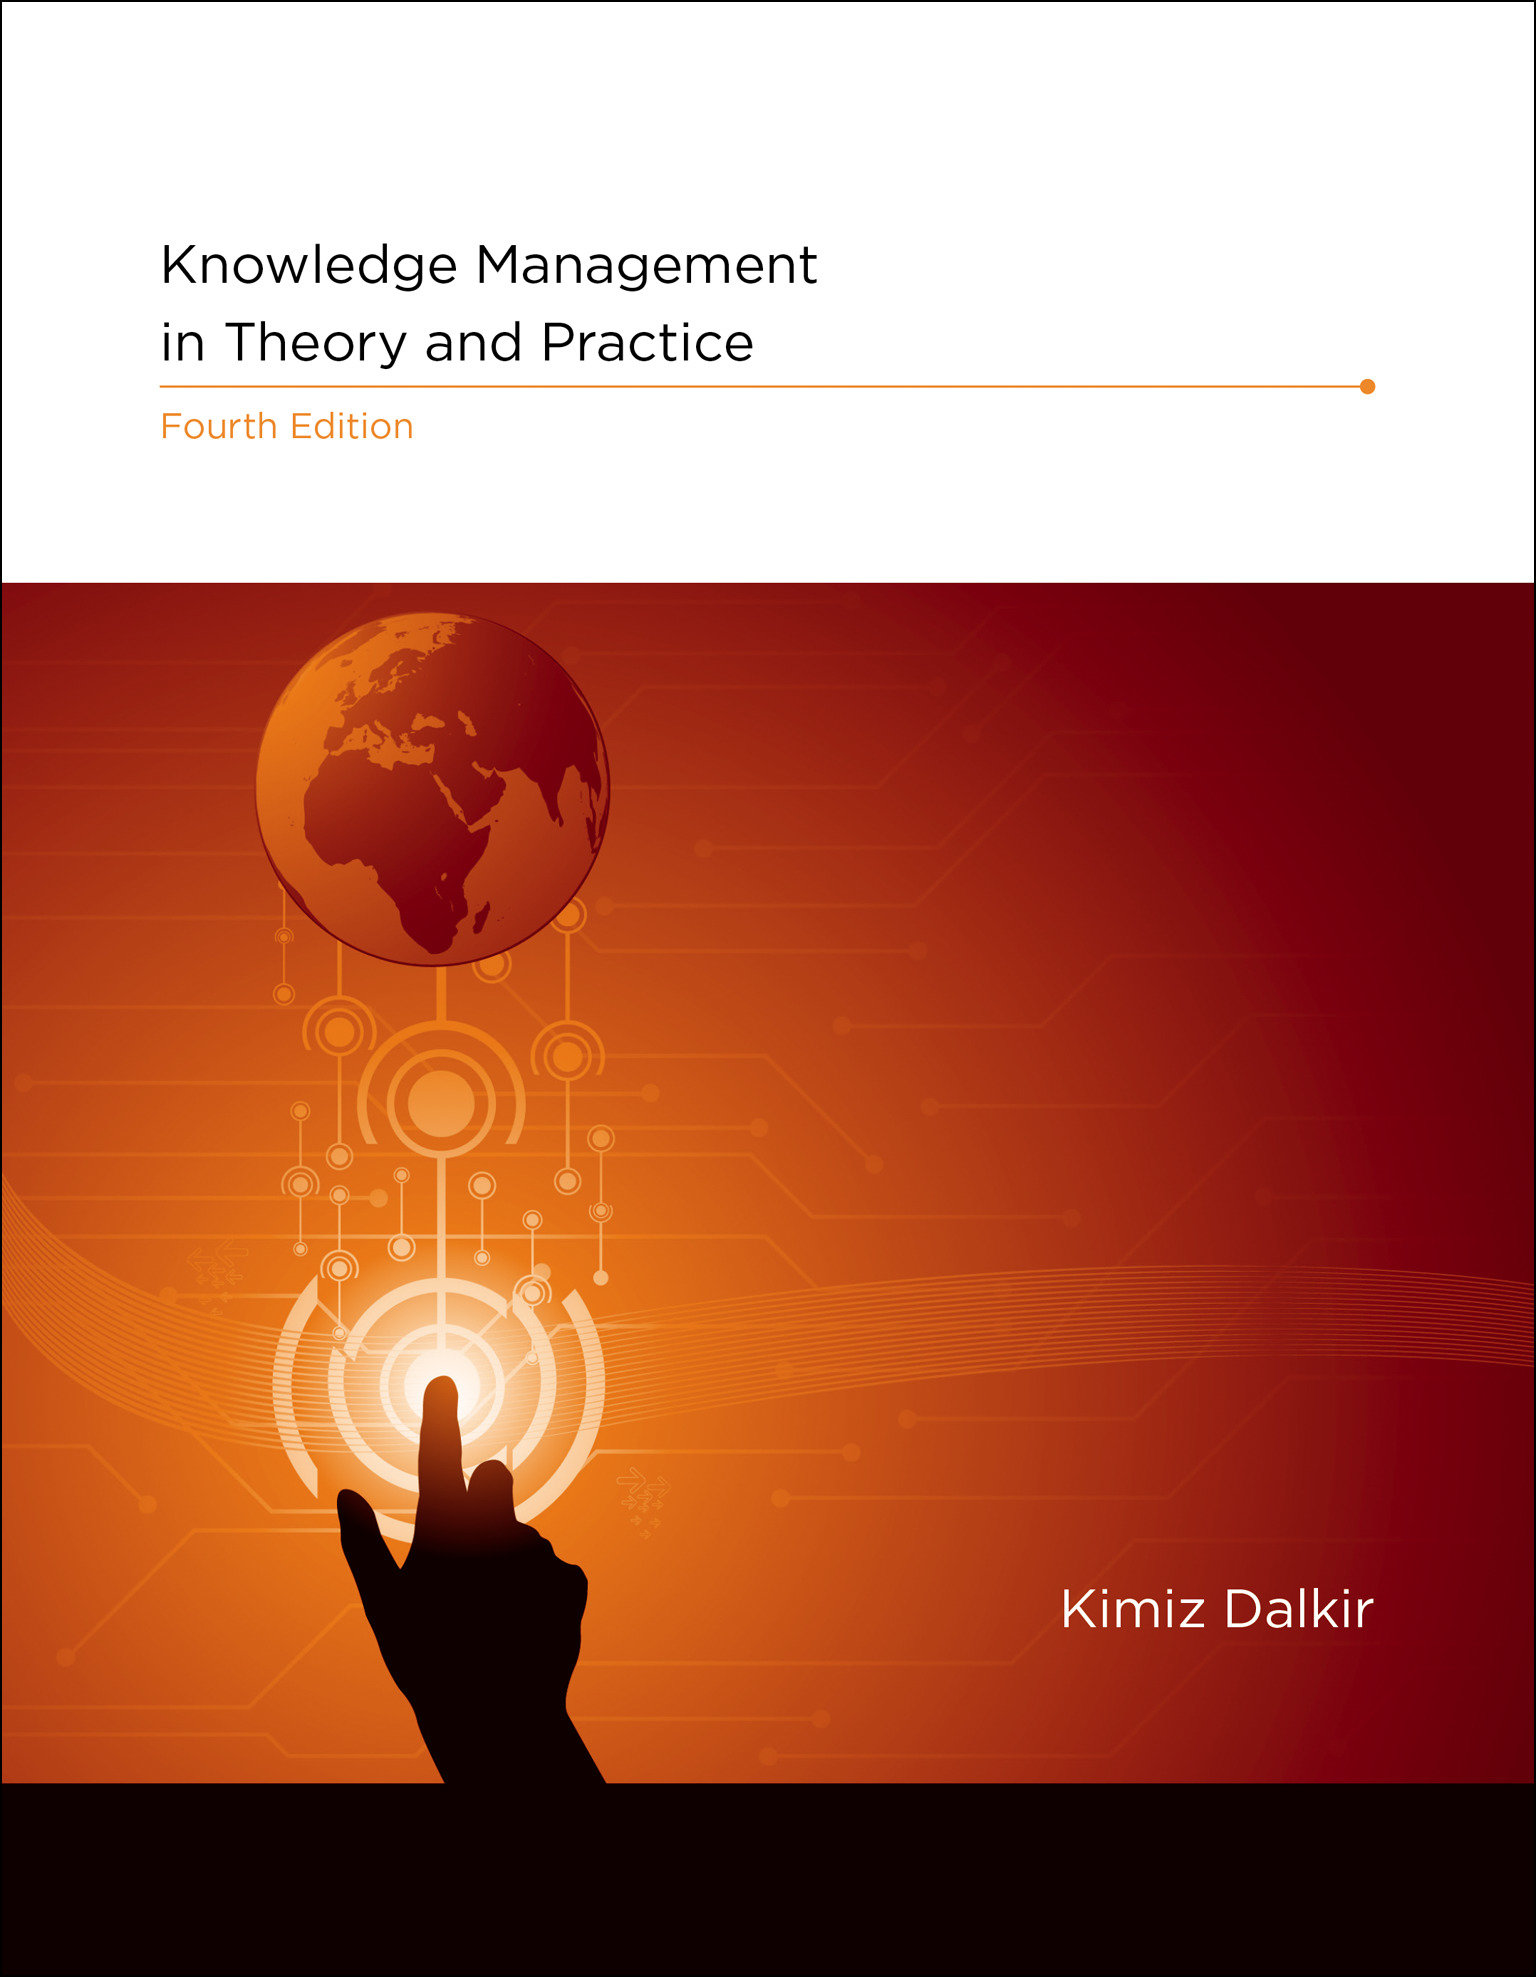 Knowledge Management In Theory And Practice, Fourth Edition (Hardcover Book)